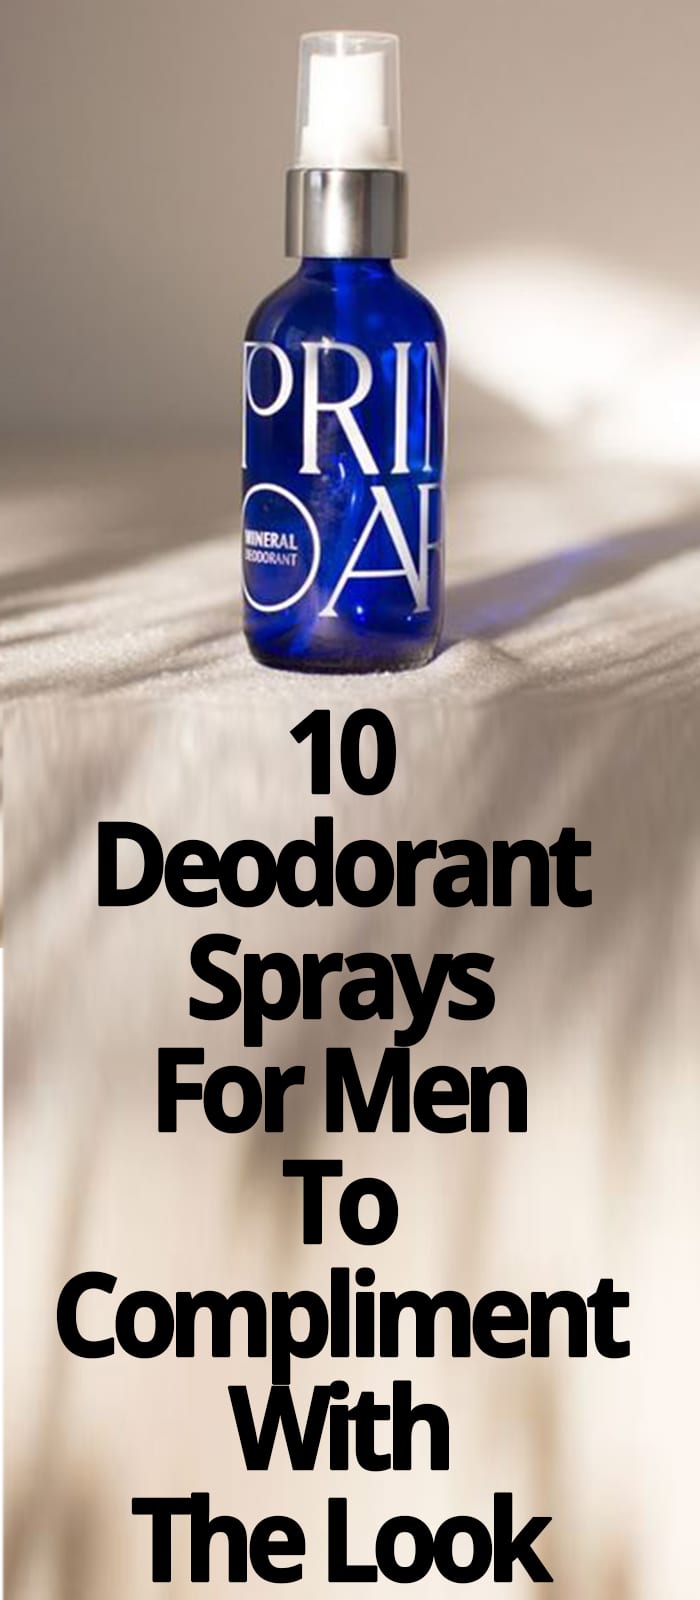 DEODORANT SPRAYS TO COMPLIMENT WITH THE LOOK